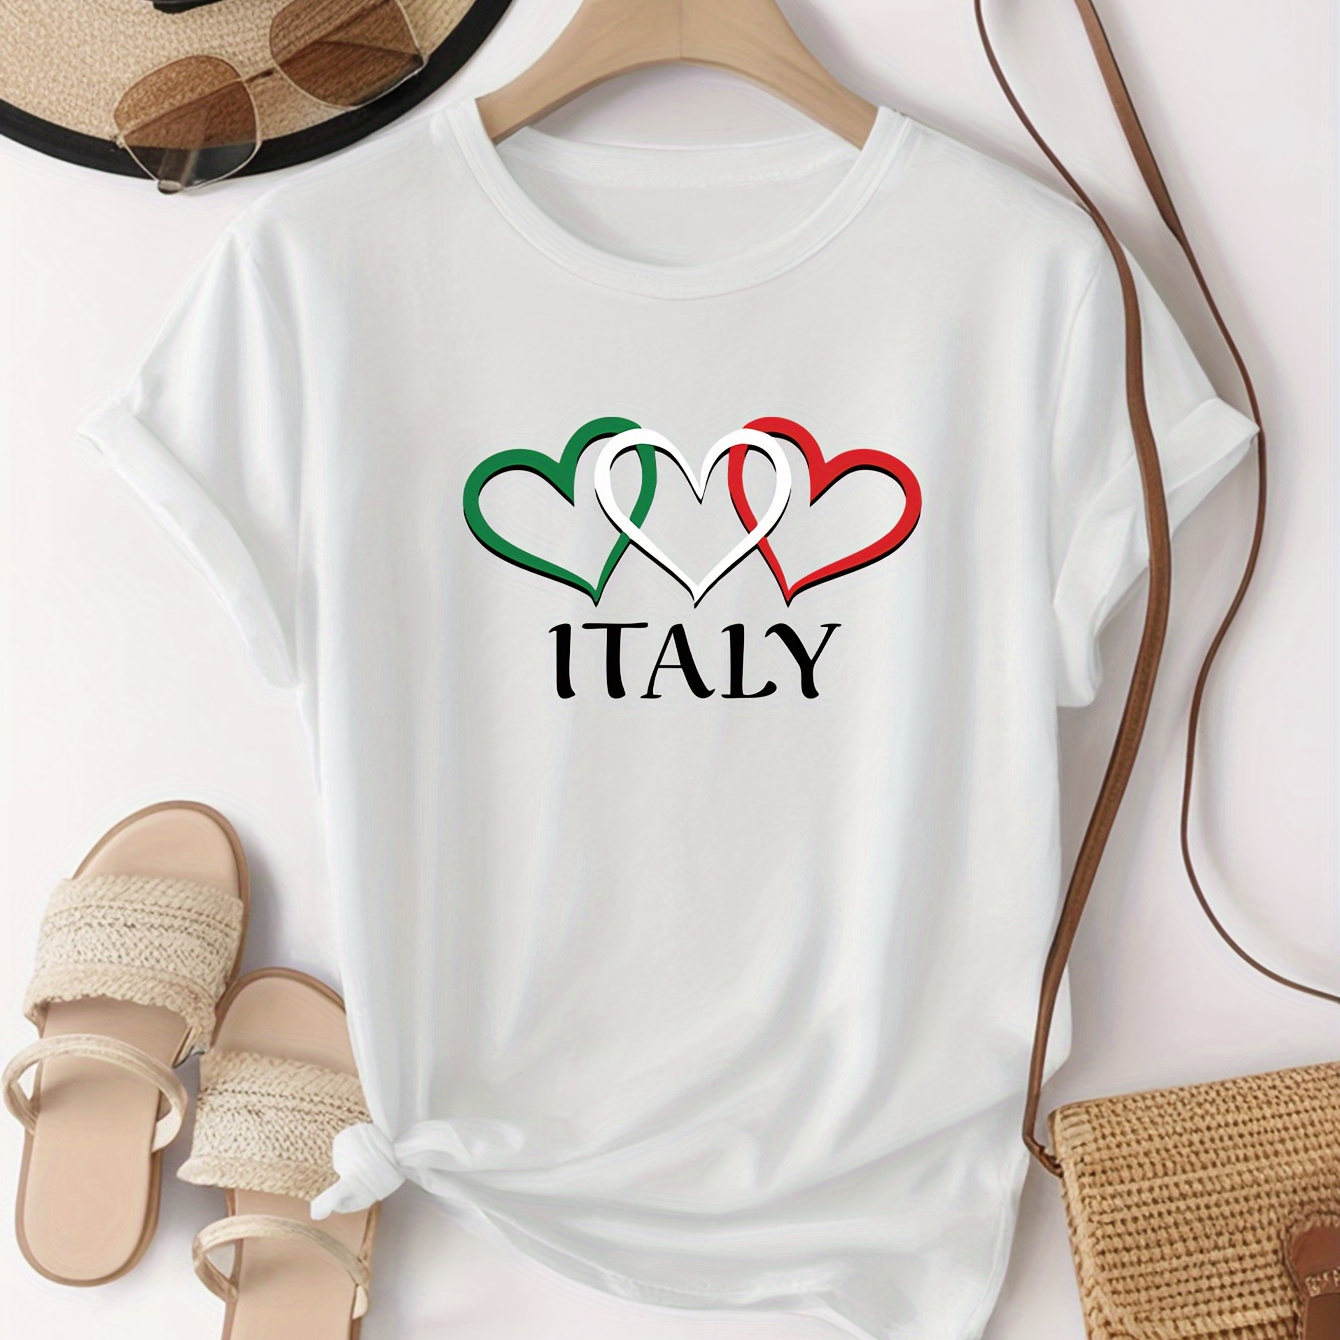 

Plus Size Heart & Italy Print T-shirt, Casual Short Sleeve Crew Neck Top For Spring & Summer, Women's Plus Size Clothing